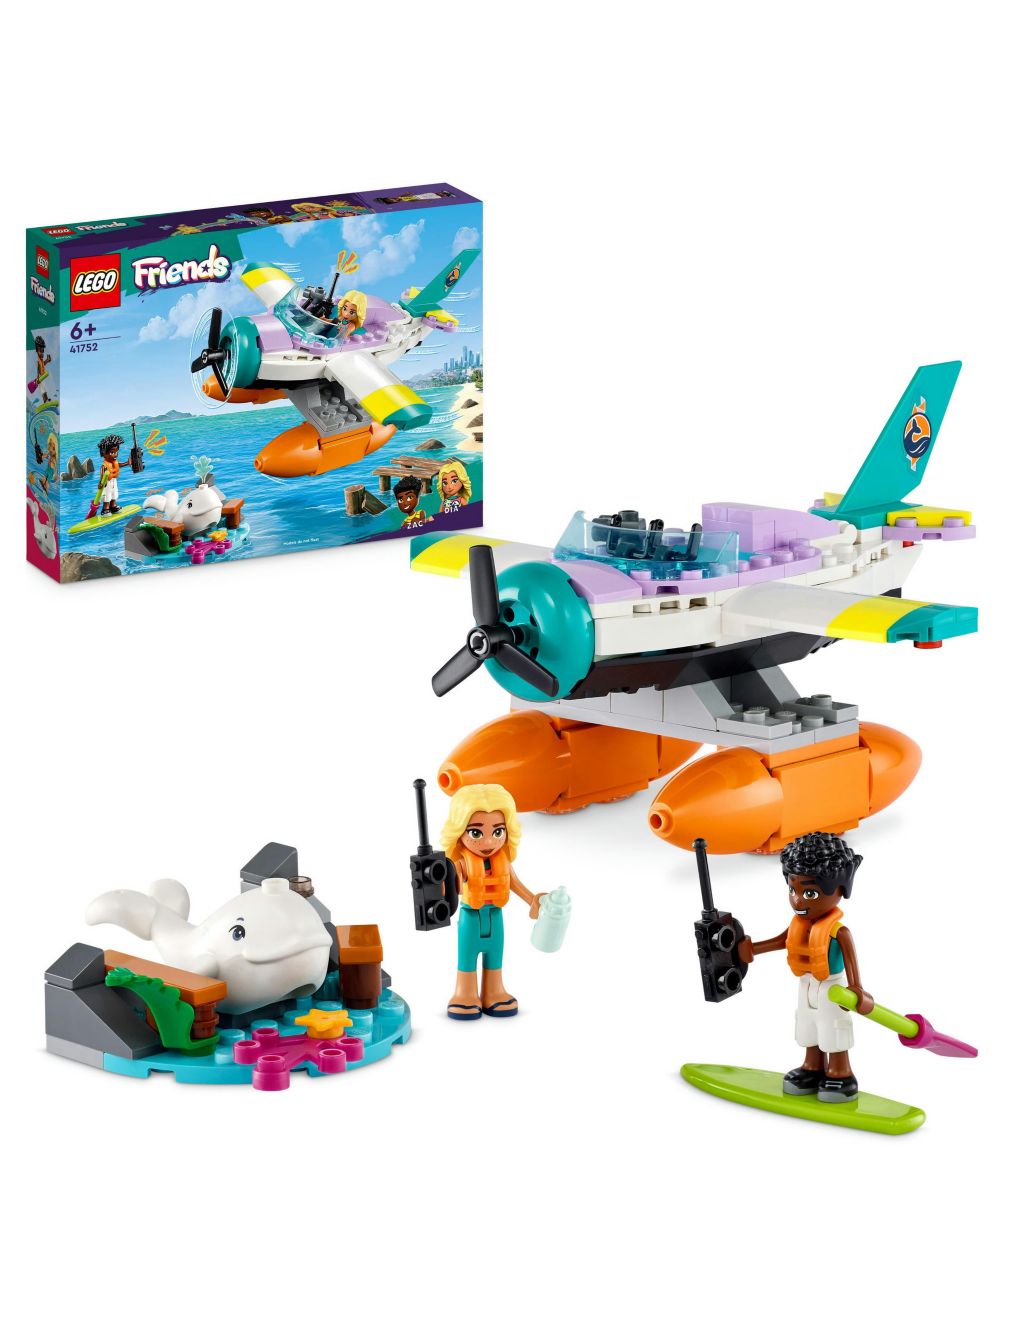 LEGO Friends Sea Rescue Plane Toy Playset (6+ Yrs) image 1